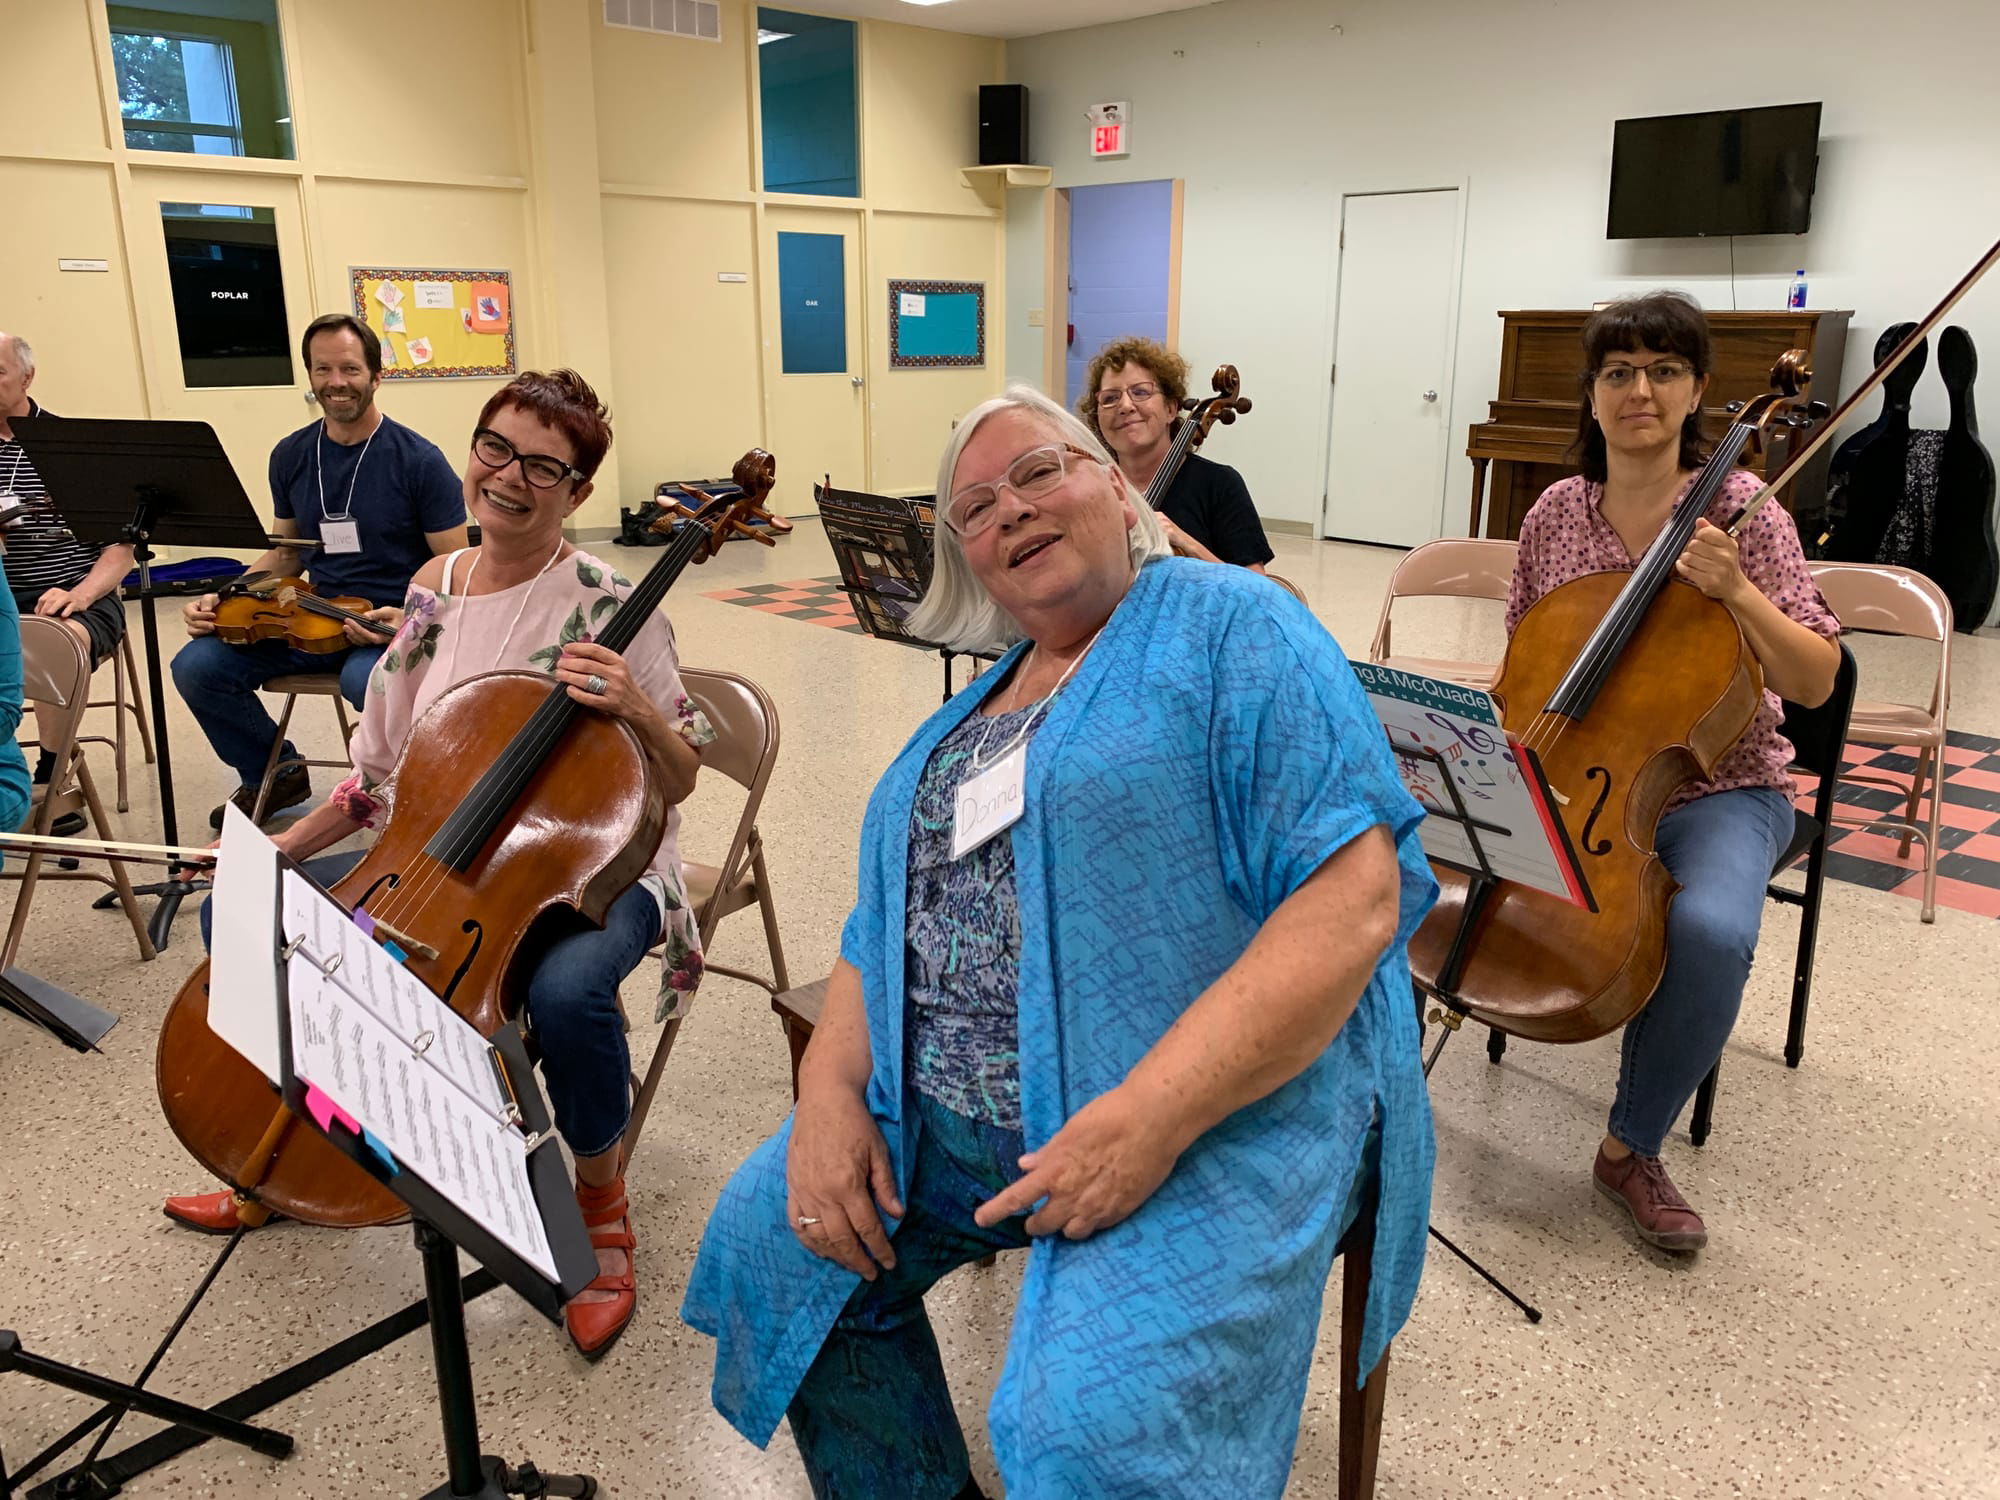 A strong cello section - what a nice change!